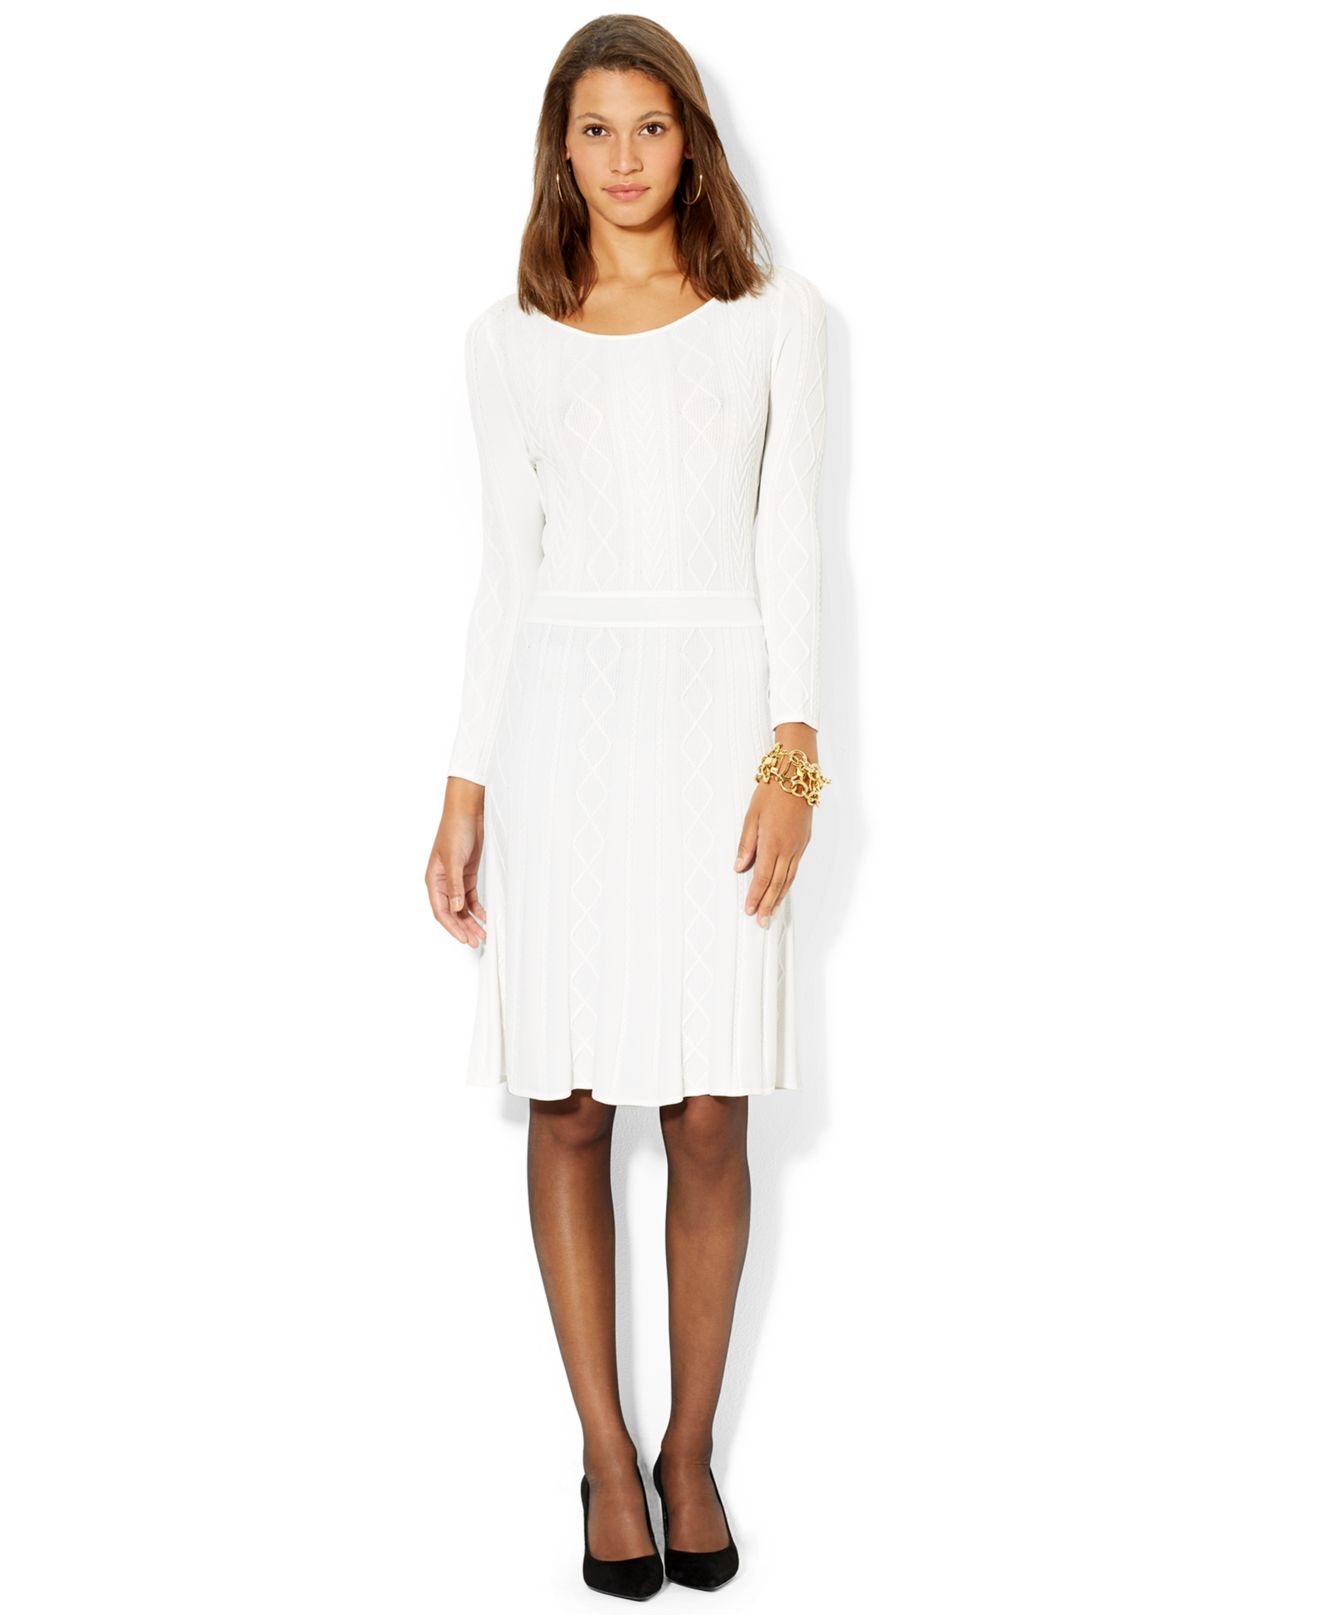 Lauren by Ralph Lauren Long-Sleeve Cable-Knit Sweater Dress in White - Lyst